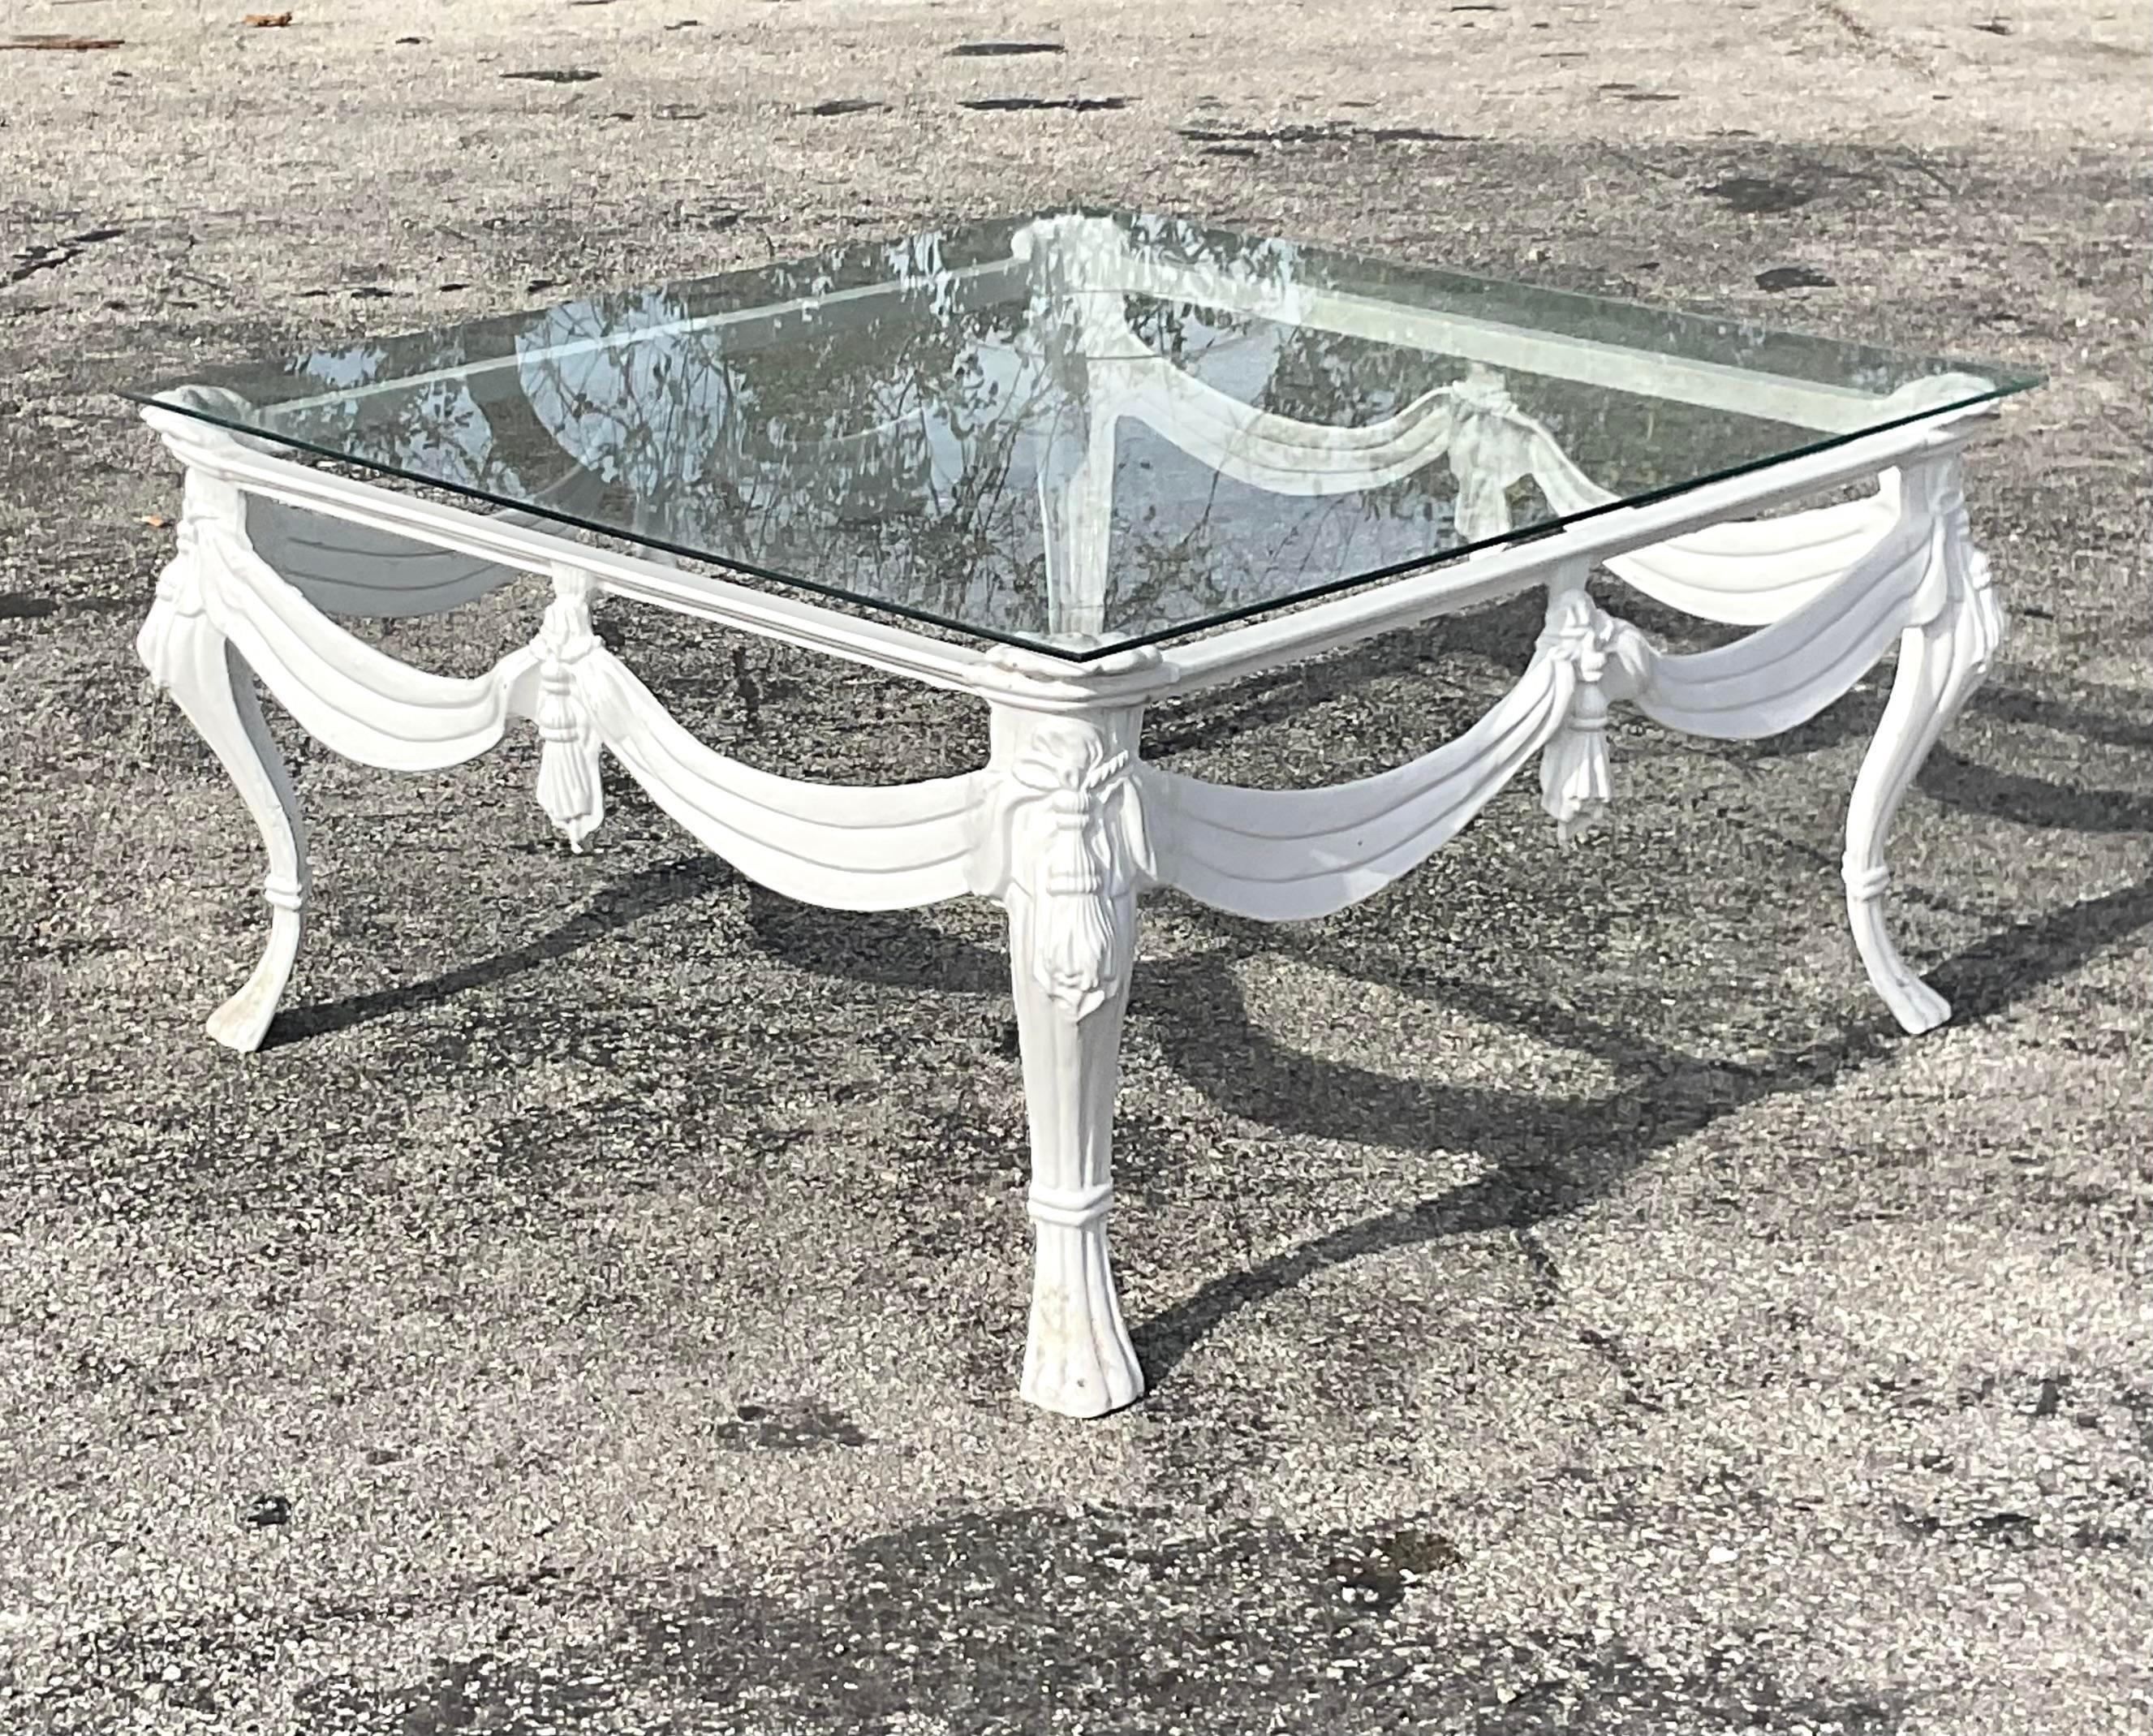 A fabulous vintage Regency outdoor coffee table. A lacquered wrought iron frame with gorgeous swag detail. Glass rests on top of the square frame. Acquired from a palm Beach estate.